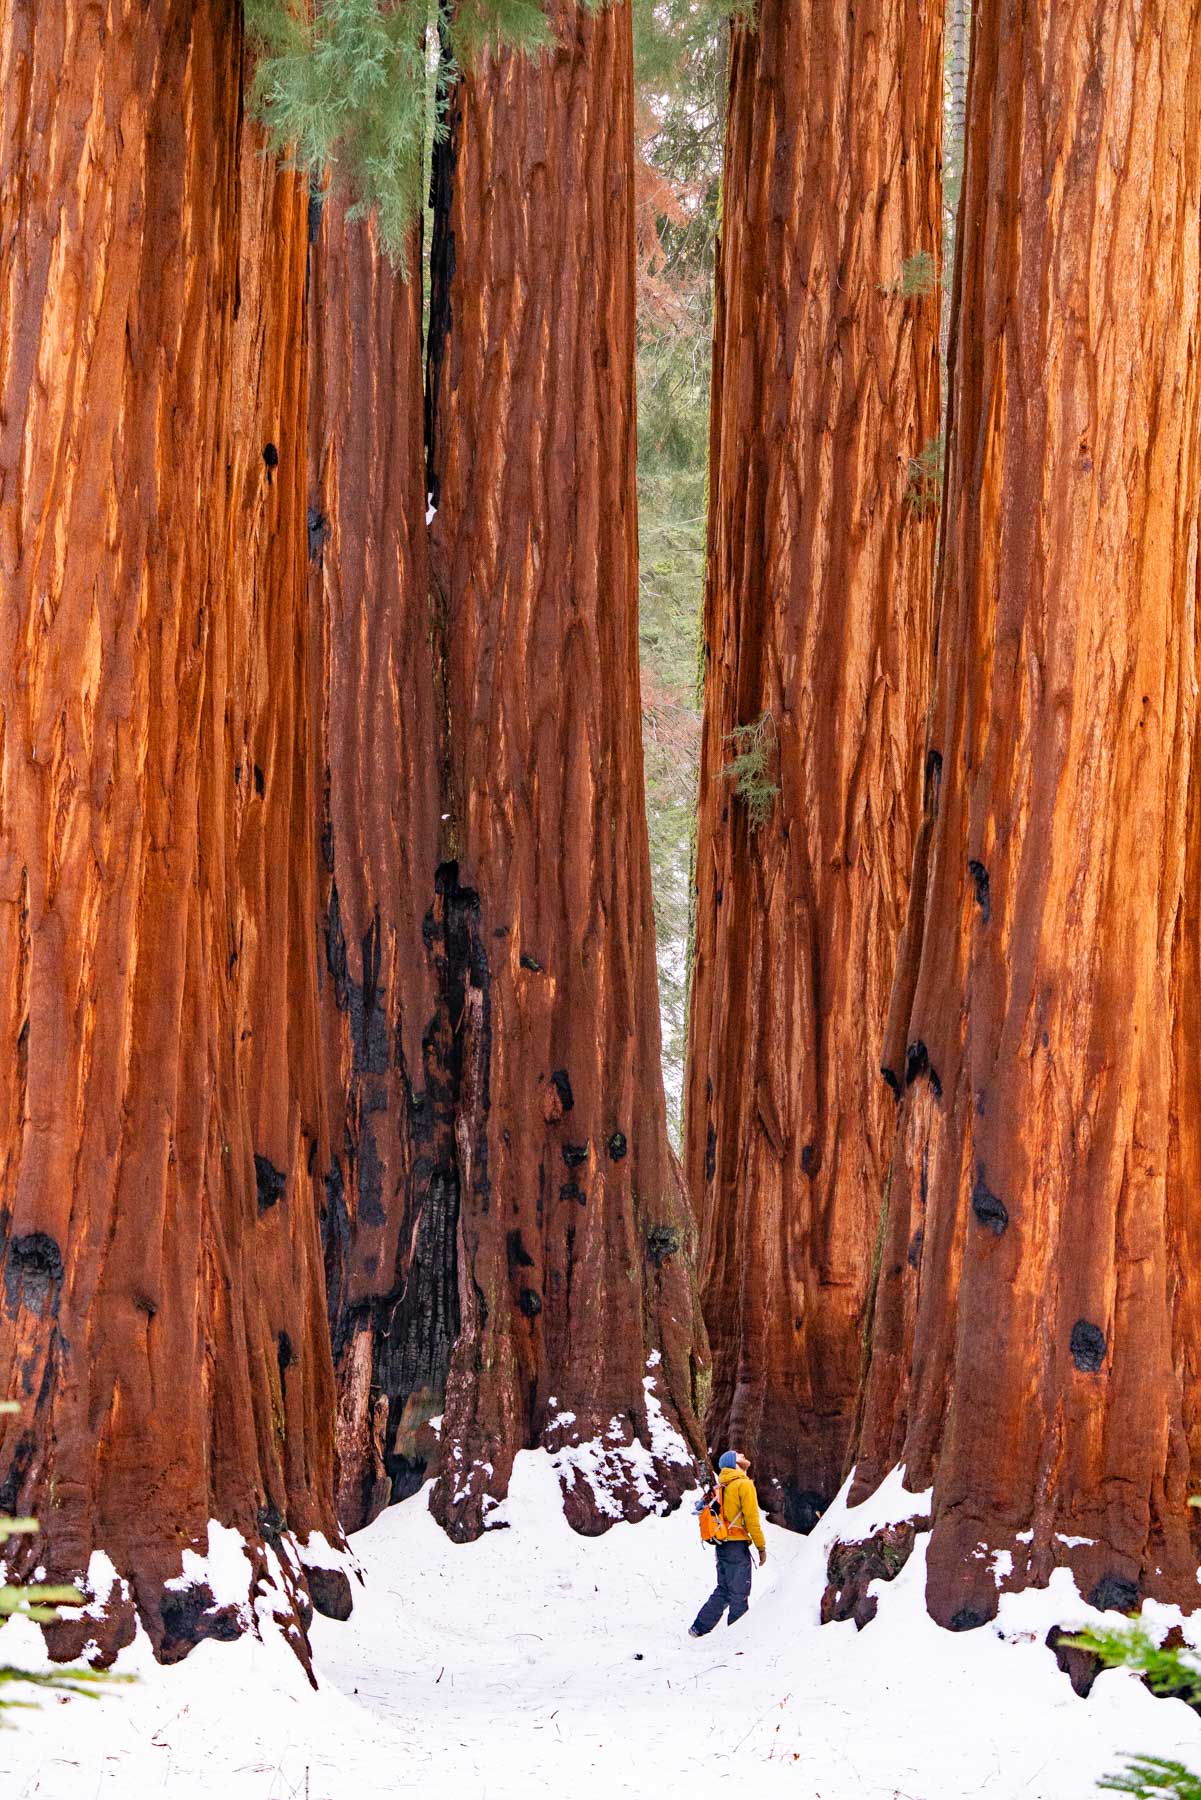 hiking the congress trail is one of the best things to do in sequoia national park